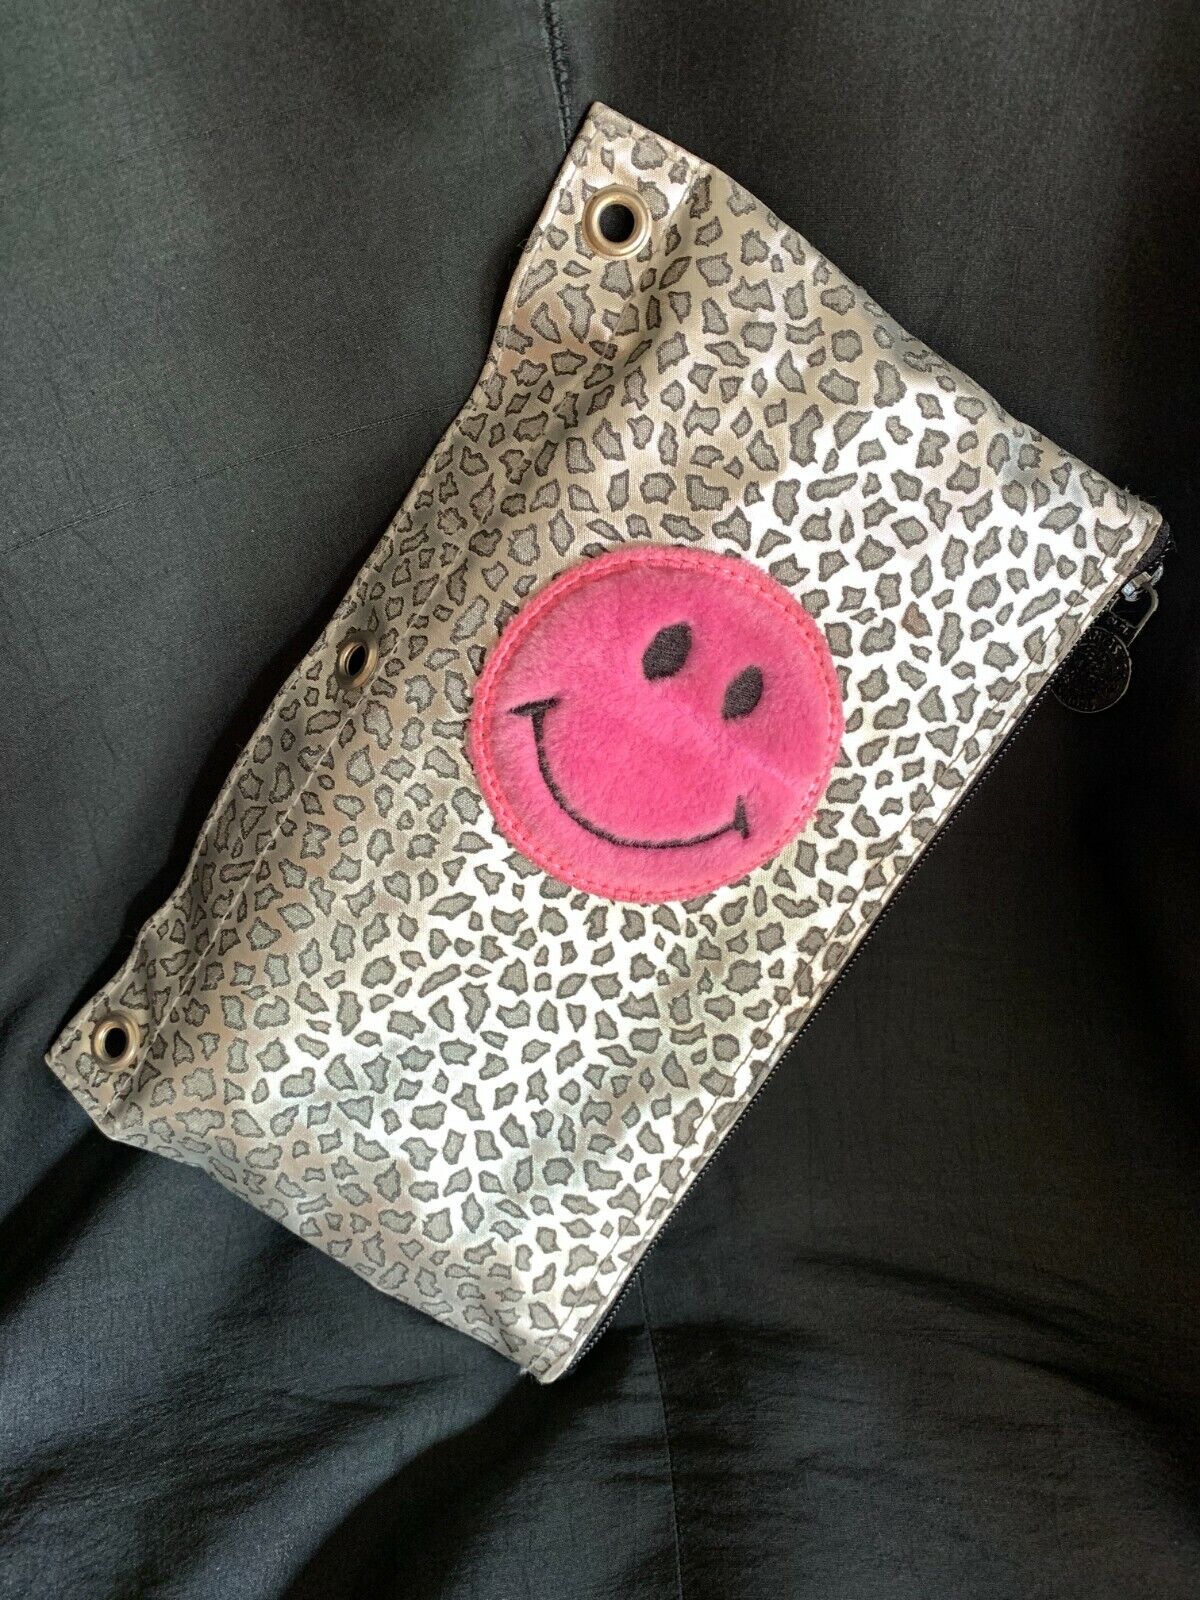 RARE LISA FRANK SMILEY FACE Pencil Leopard Case Pouch Bag PINK Soft Fluffy 